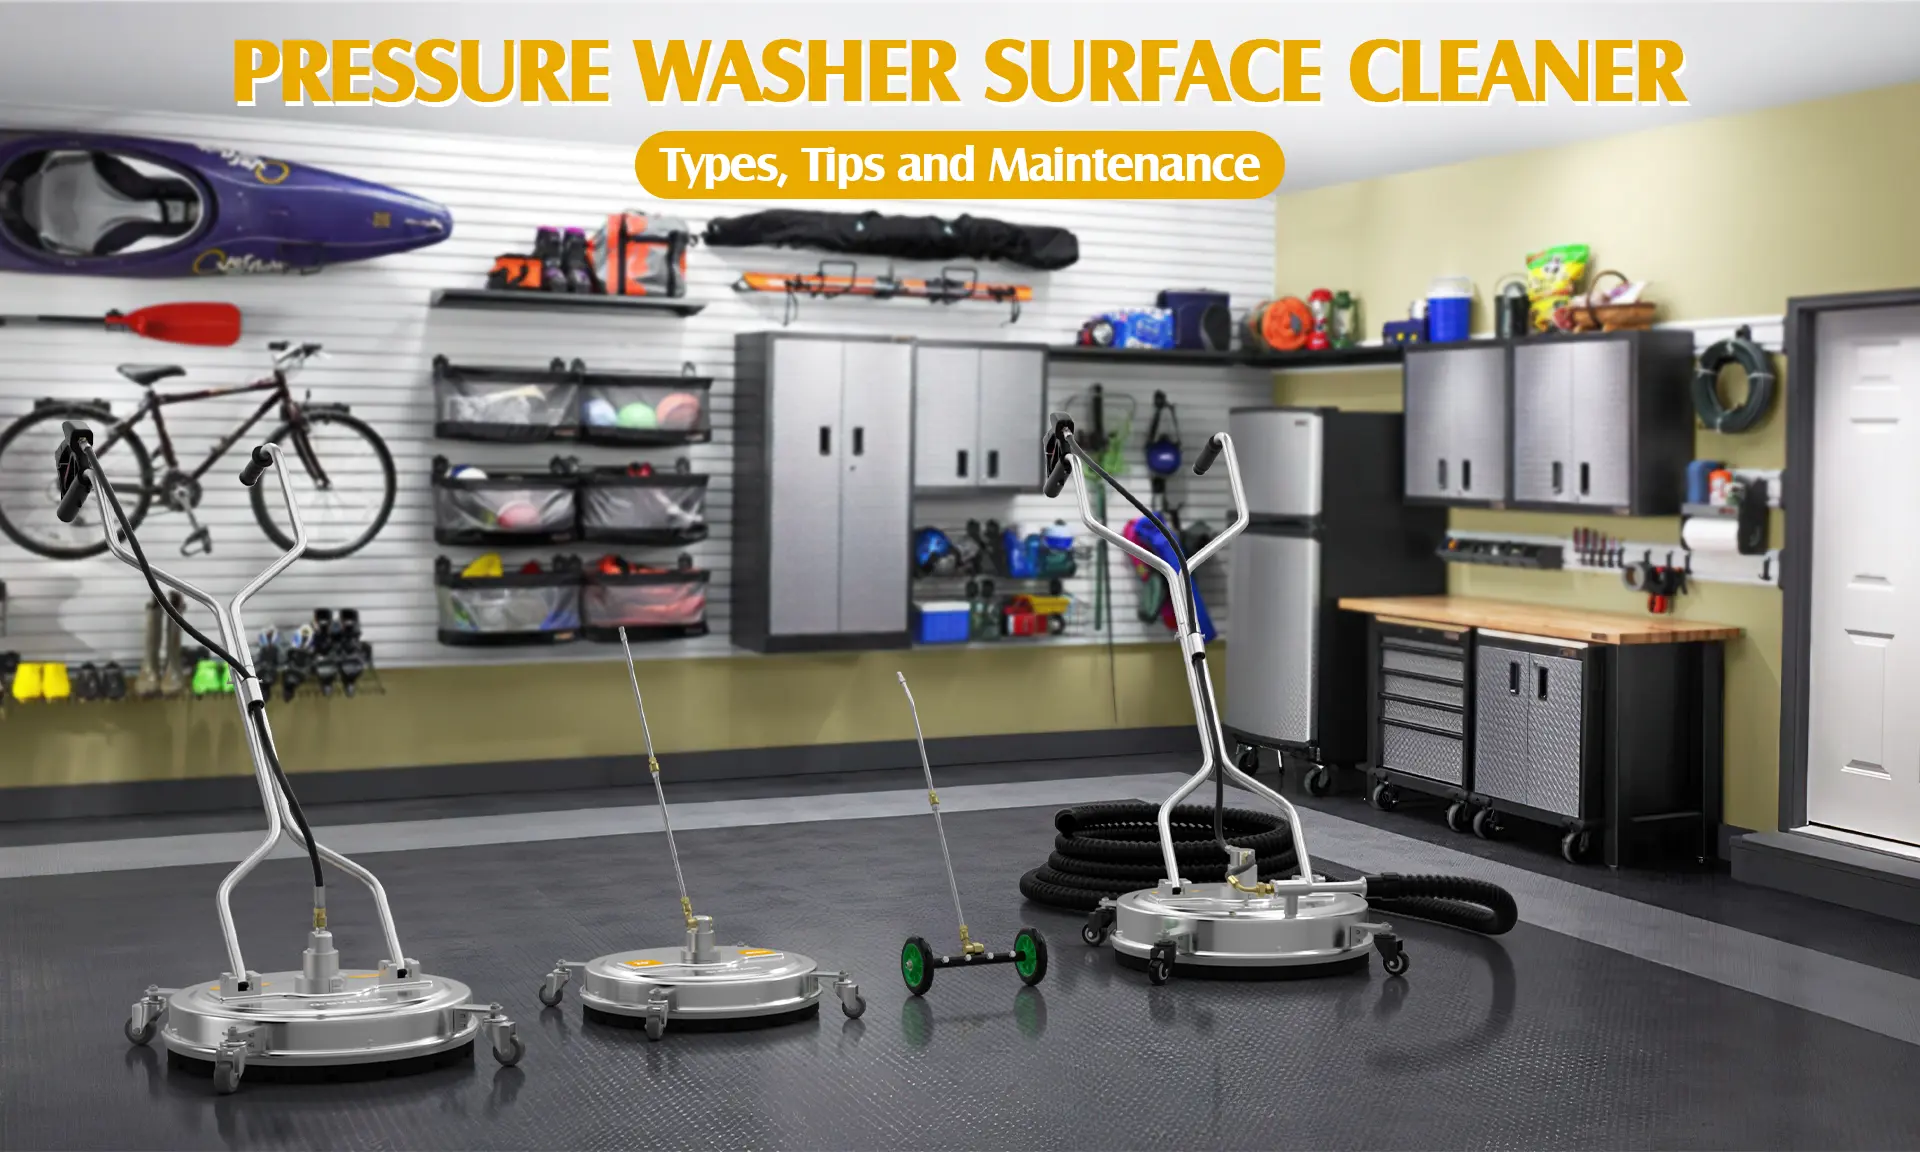 Pressure washer surface cleaner TYPES,TIPS Maintenance